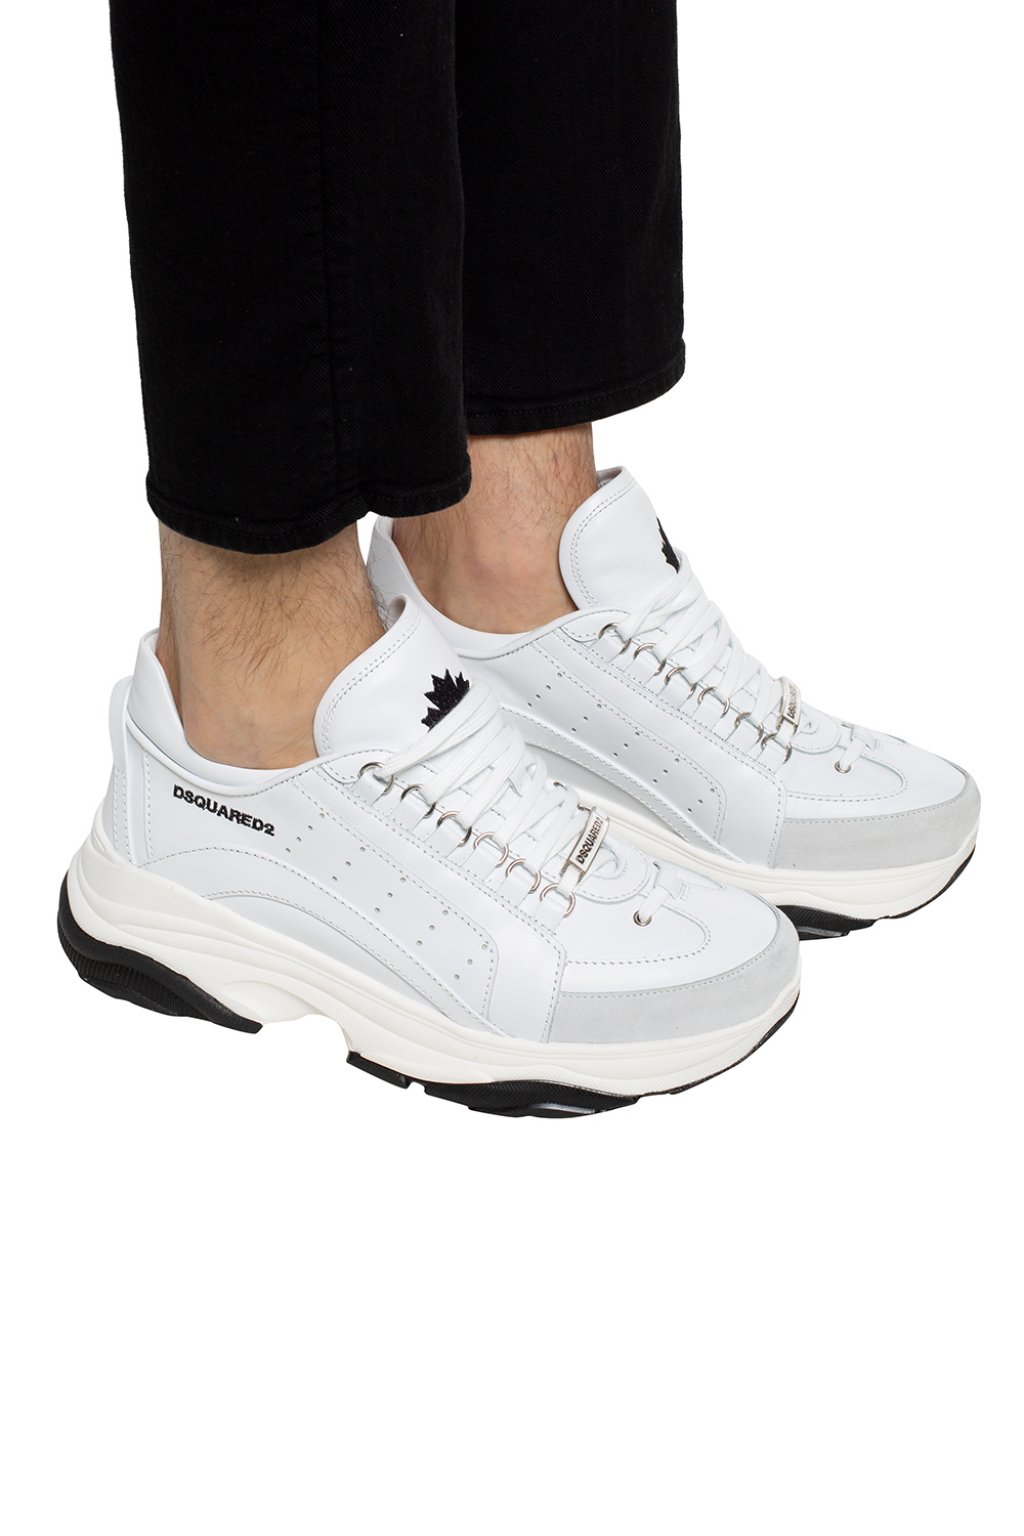 dsquared bumpy sneakers